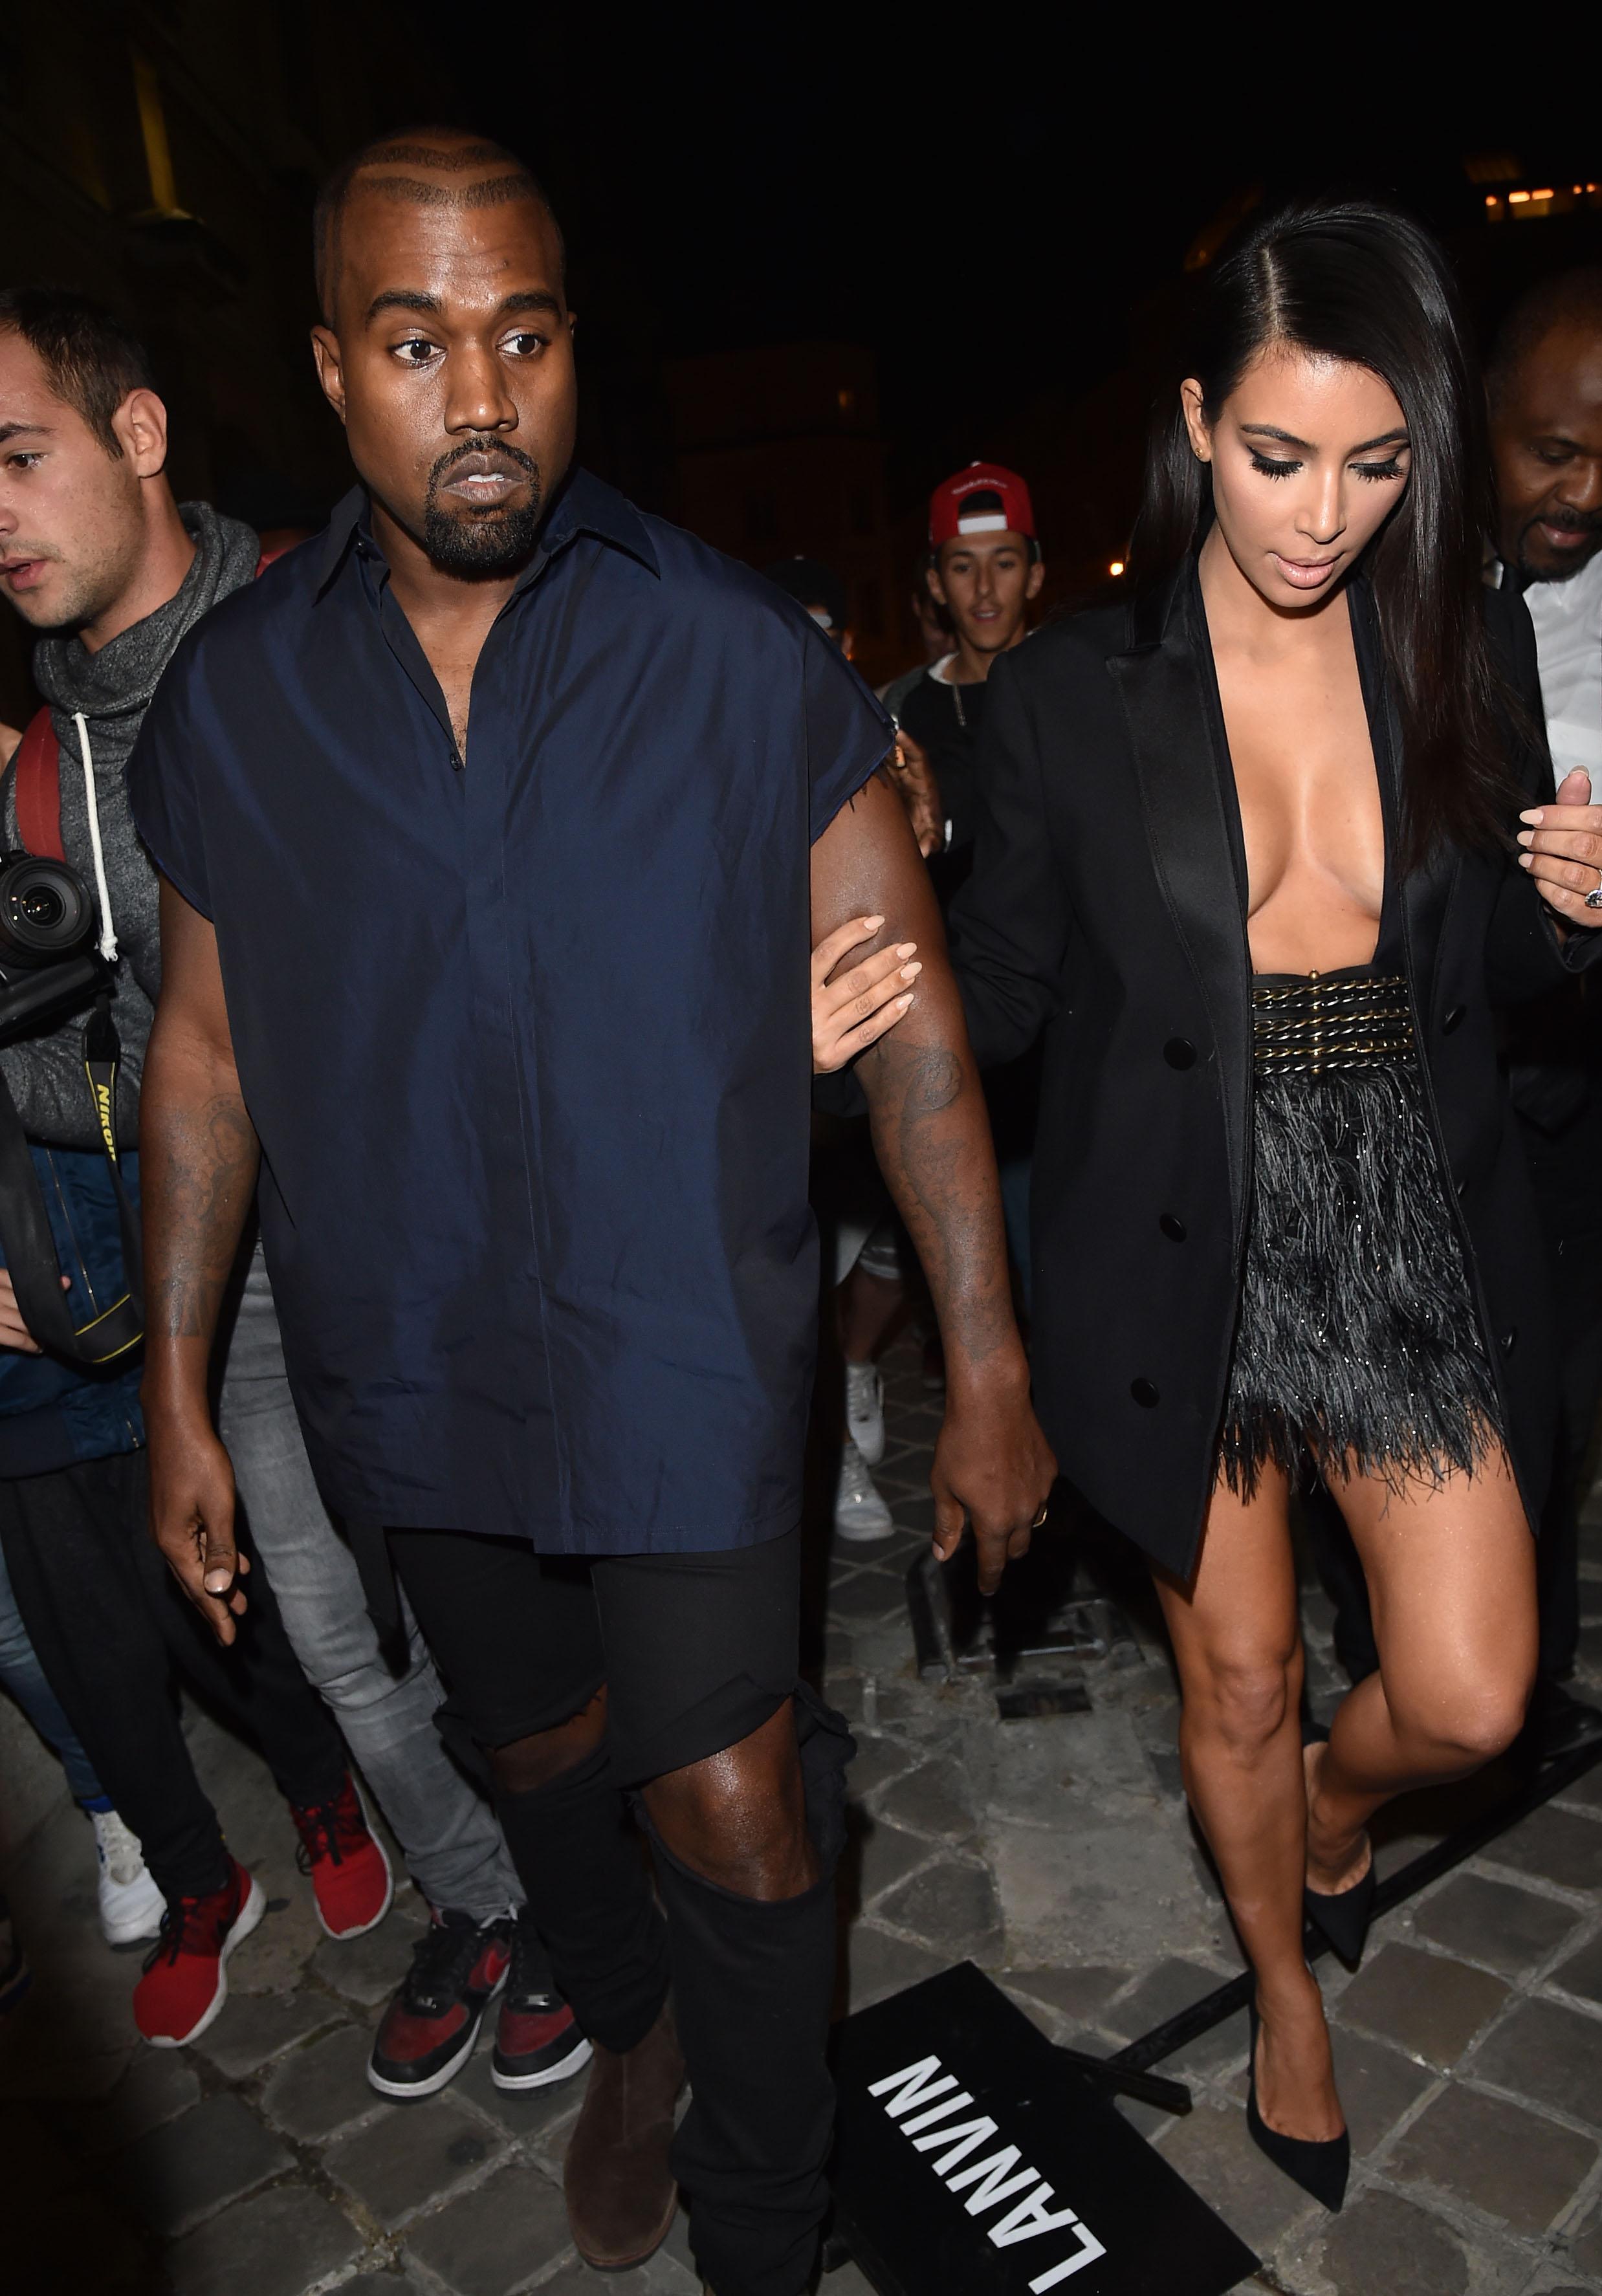 Kanye West and Kim Kardashian attend the Lanvin show